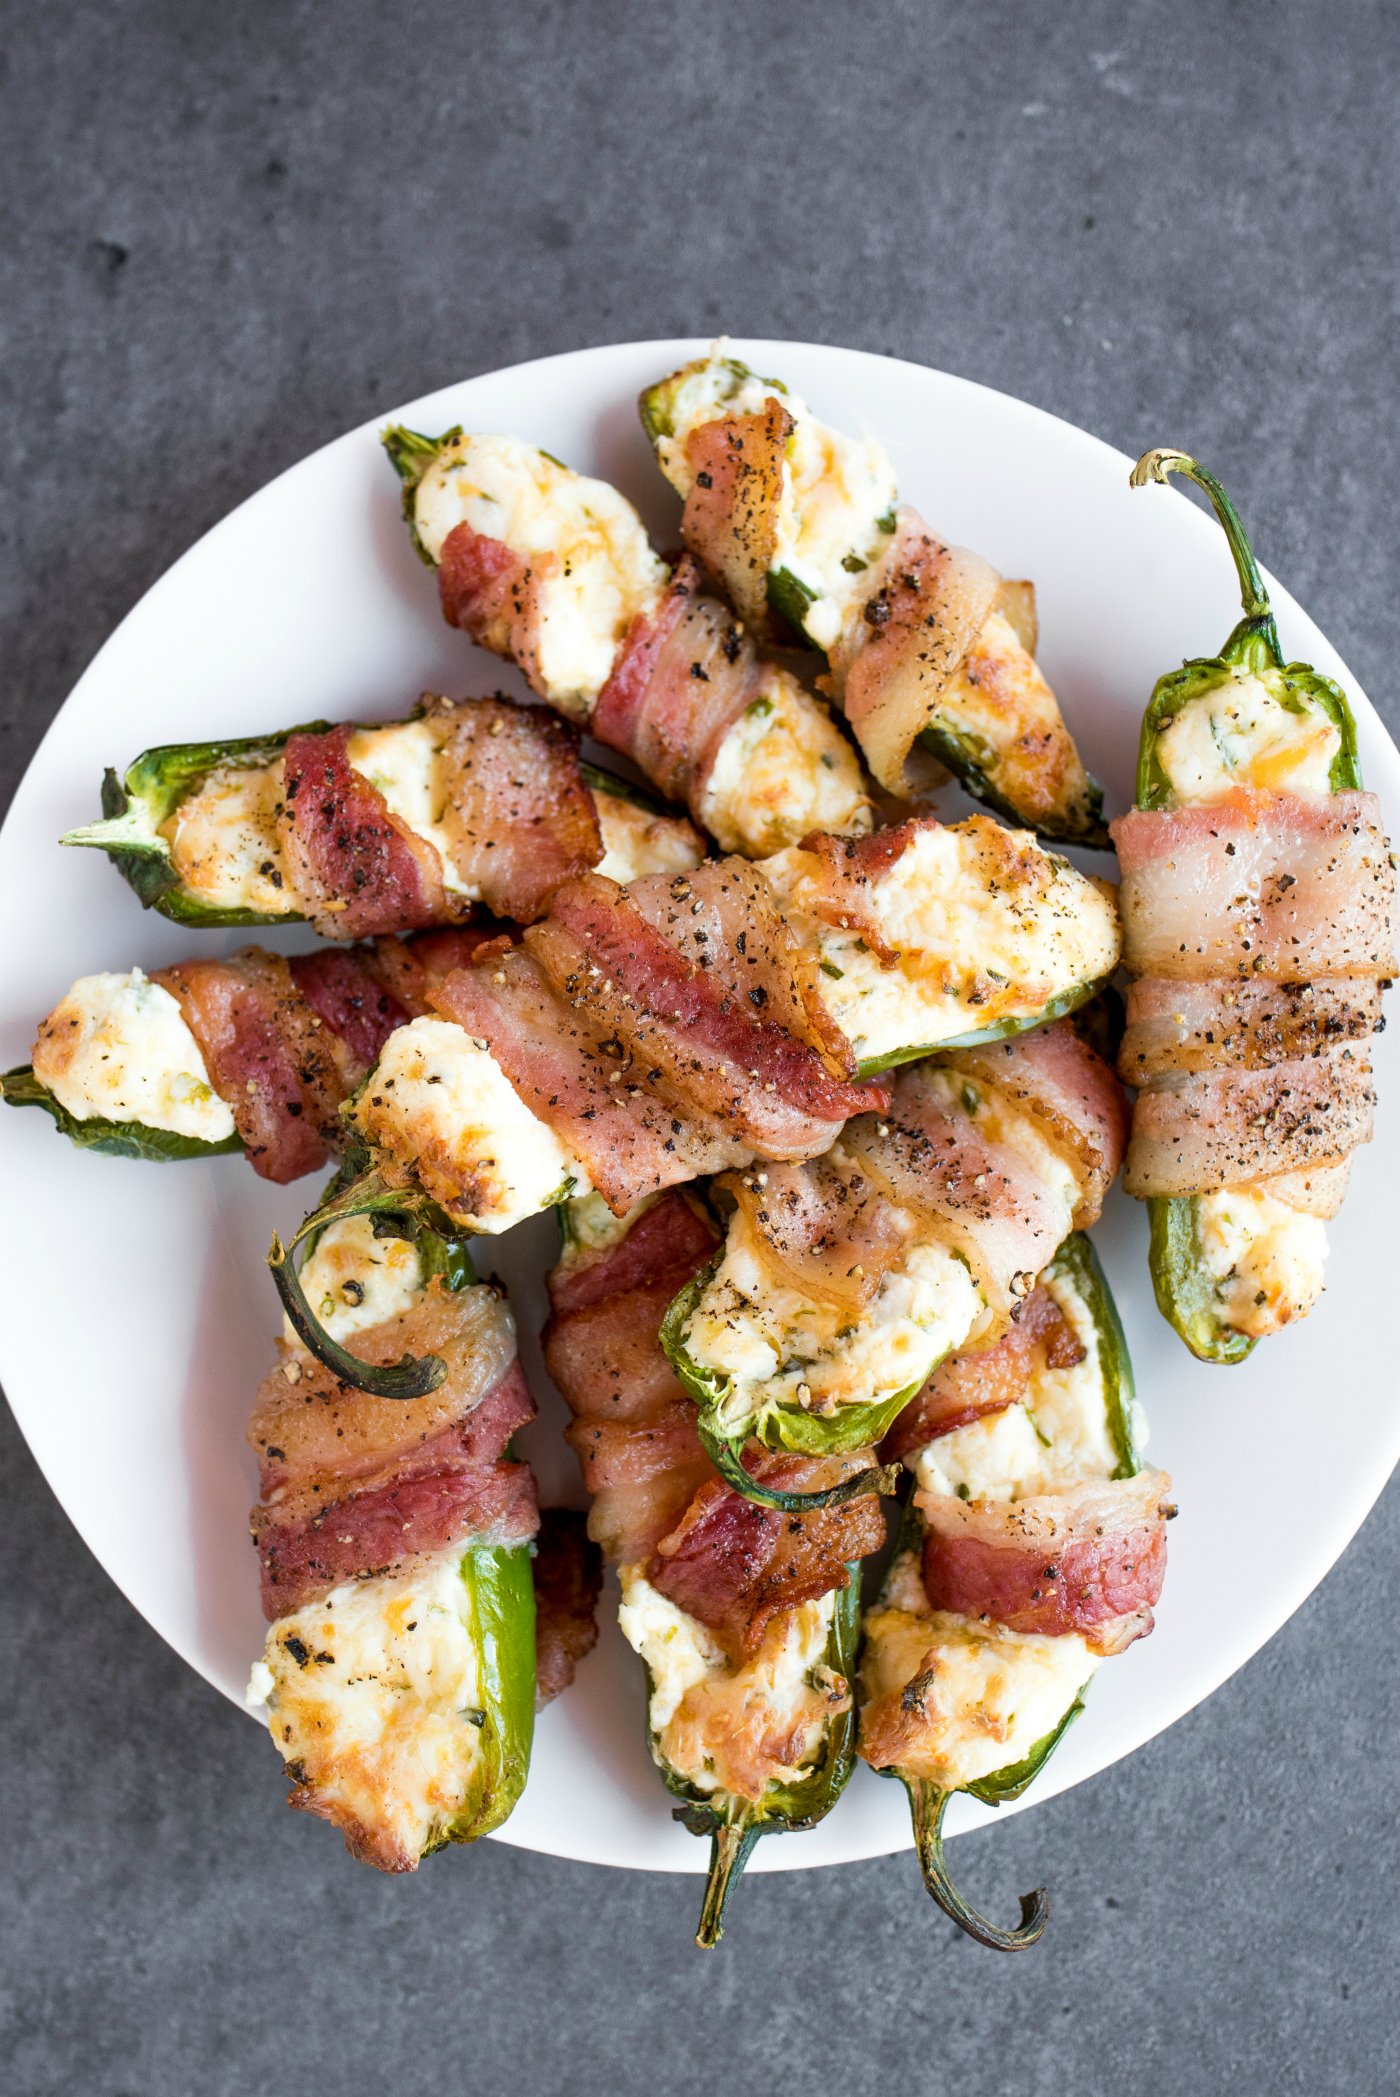 https://reluctantentertainer.com/wp-content/uploads/2019/08/Bacon-Wrapped-Cheesy-Jalape%C3%B1o-Poppers-6.jpg